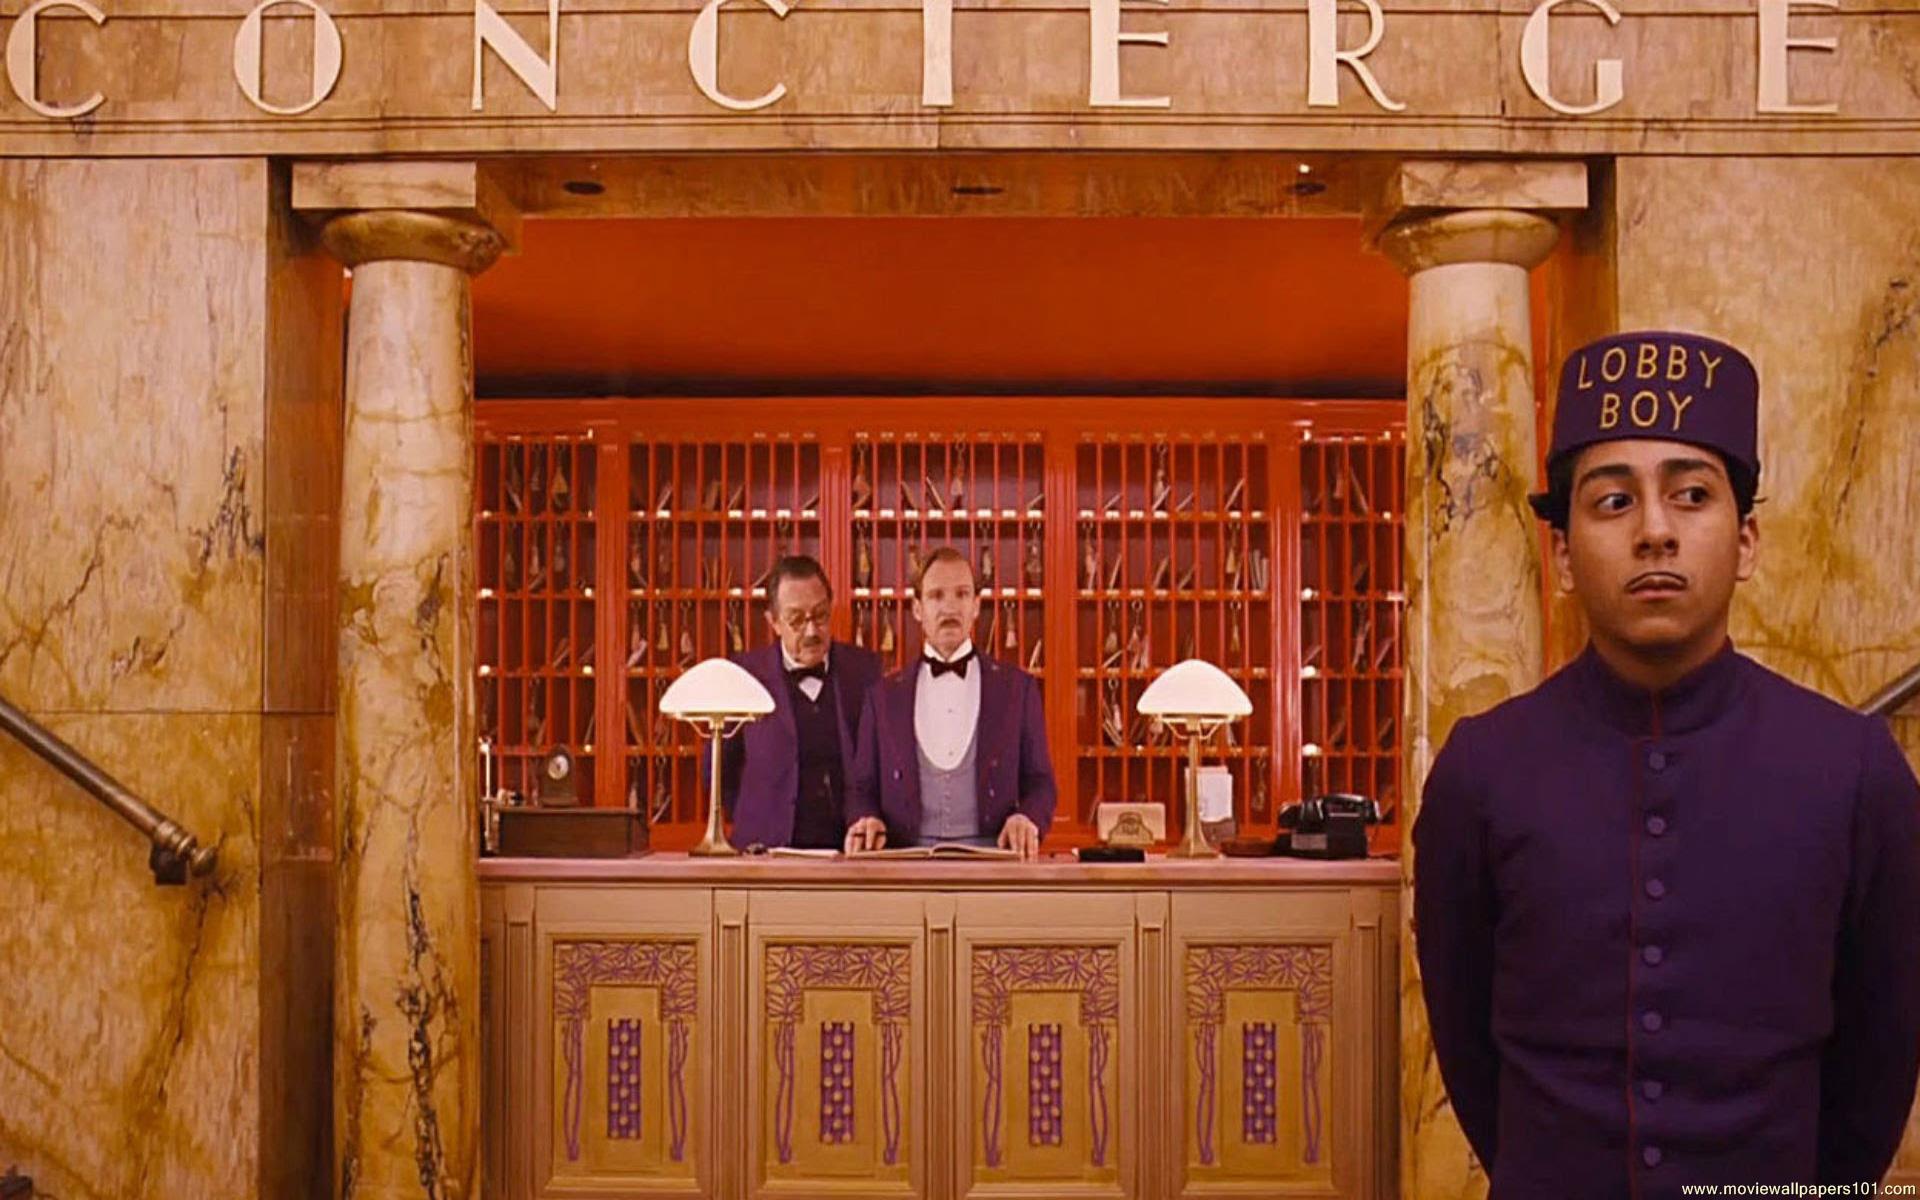 The Grand Budapest Hotel Wallpapers - Wallpaper Cave